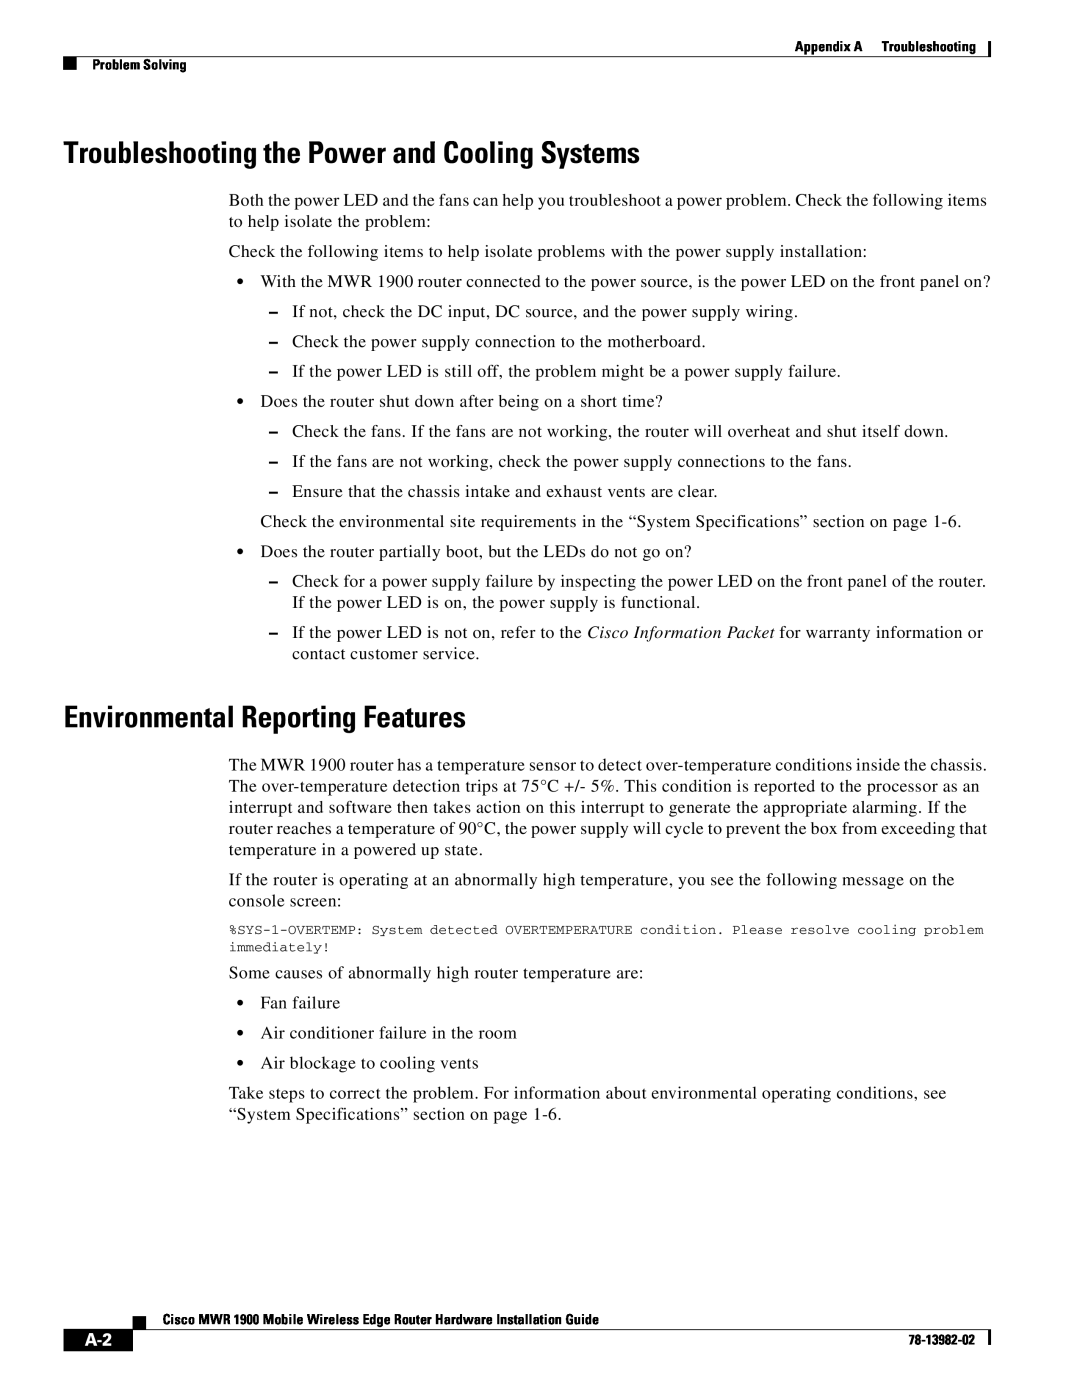 Cisco Systems MWR 1900 manual Troubleshooting the Power and Cooling Systems, Environmental Reporting Features 